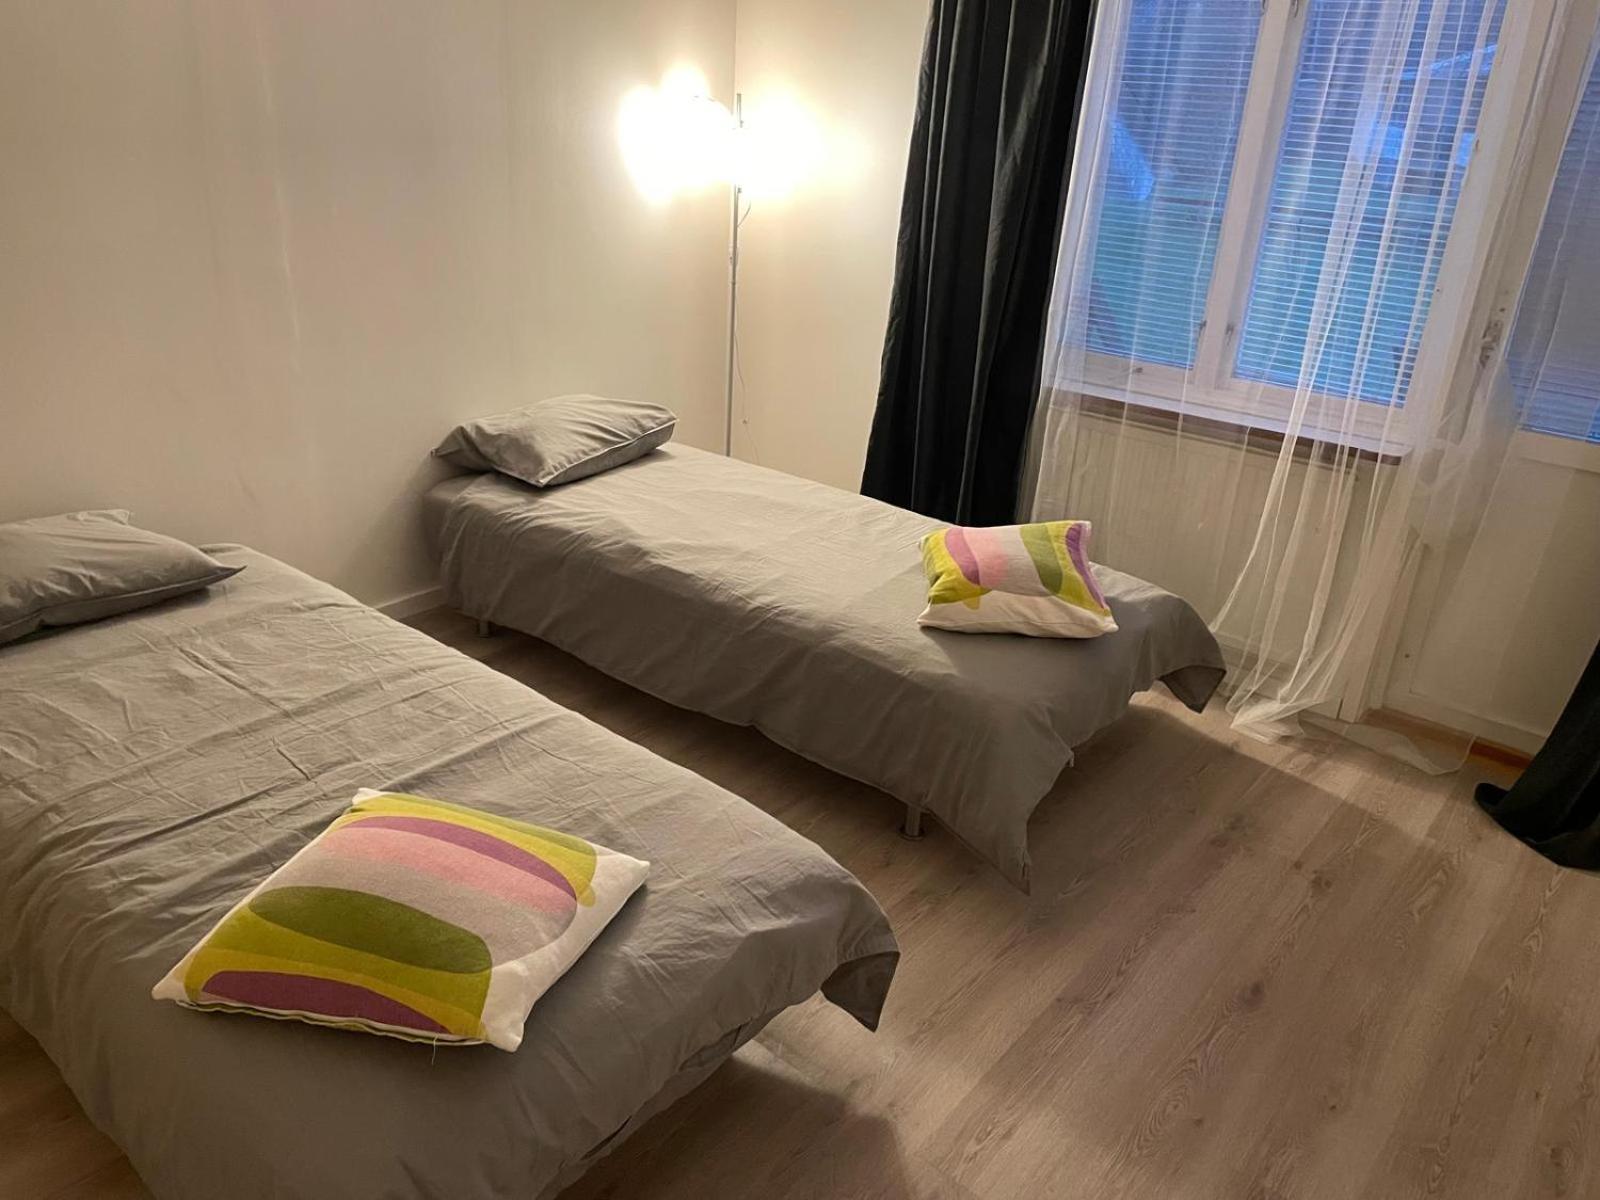 Modern 3 Bed Rooms In Almhult Close To Vaxjo Airport 外观 照片